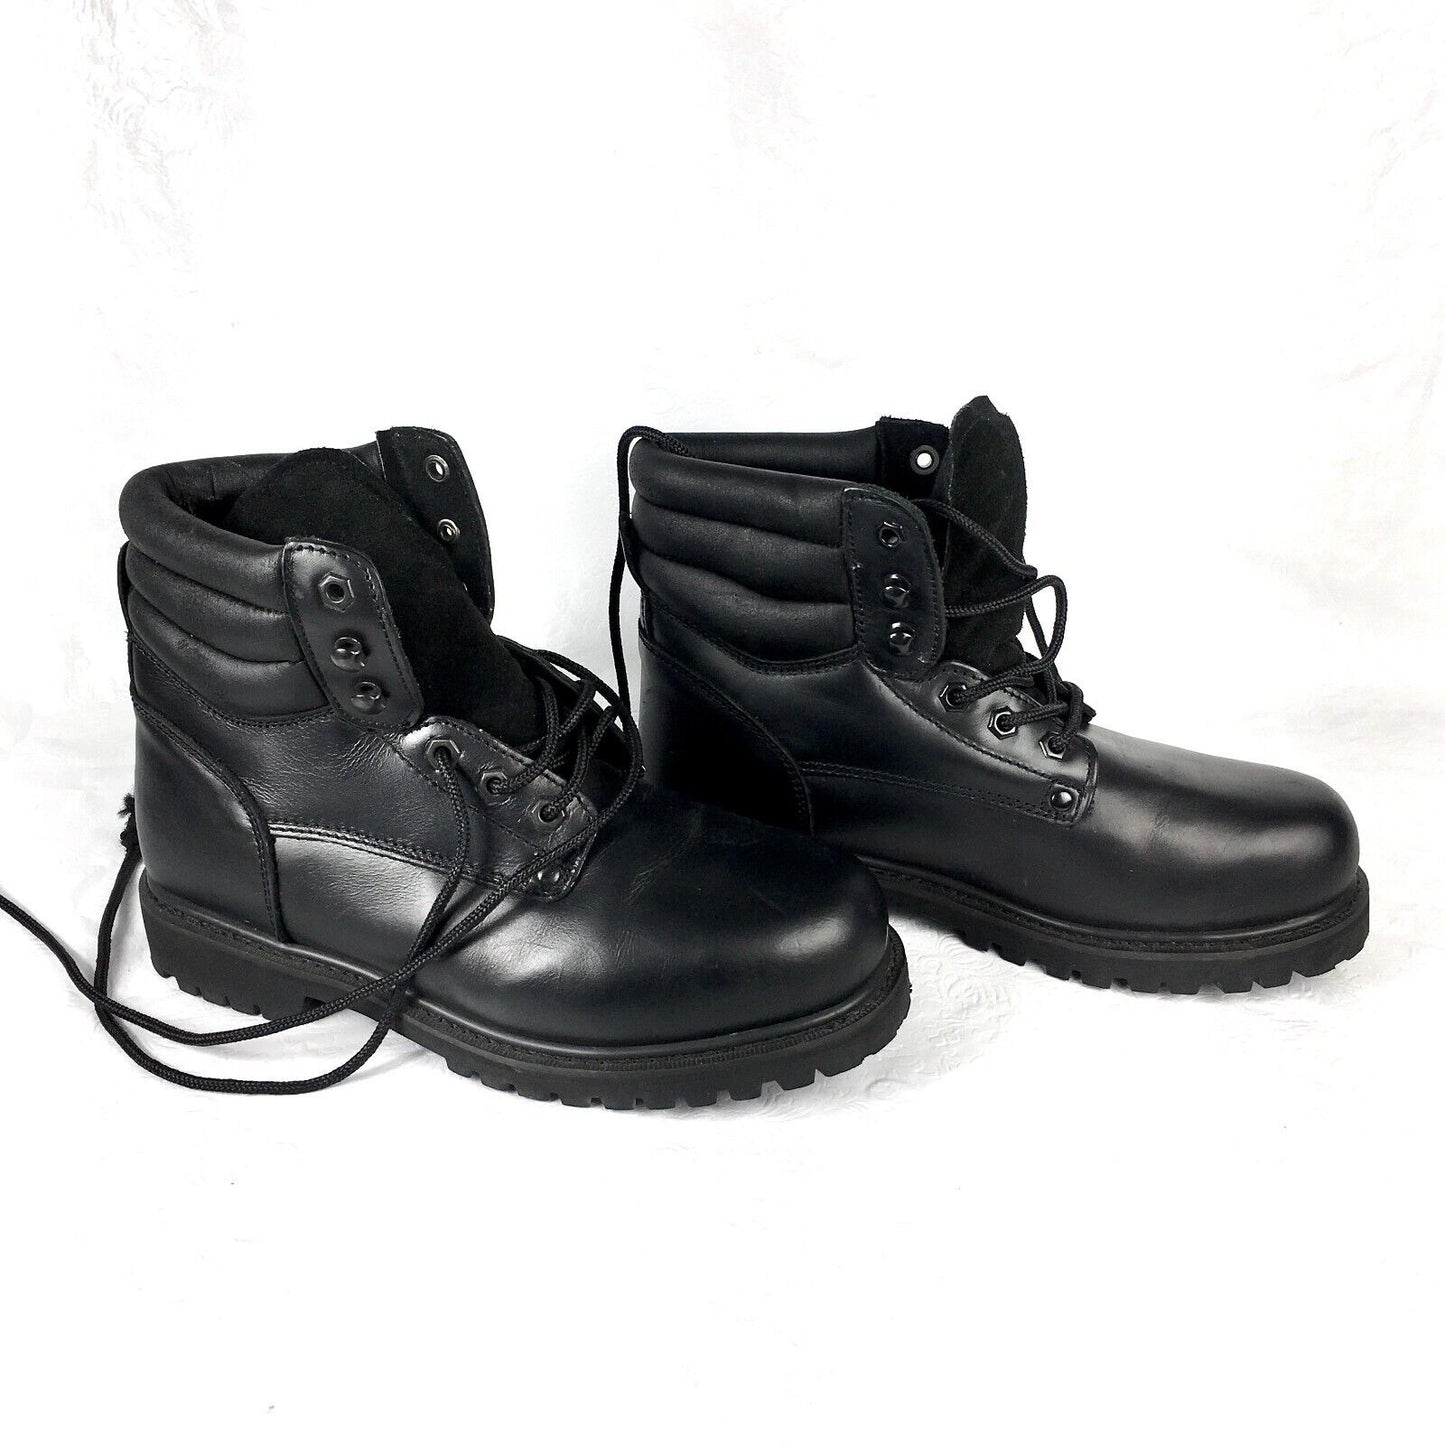 Sears Men 84711 Black Leather Lace Up Round Steel Toe Ankle Work Boots Size 9D